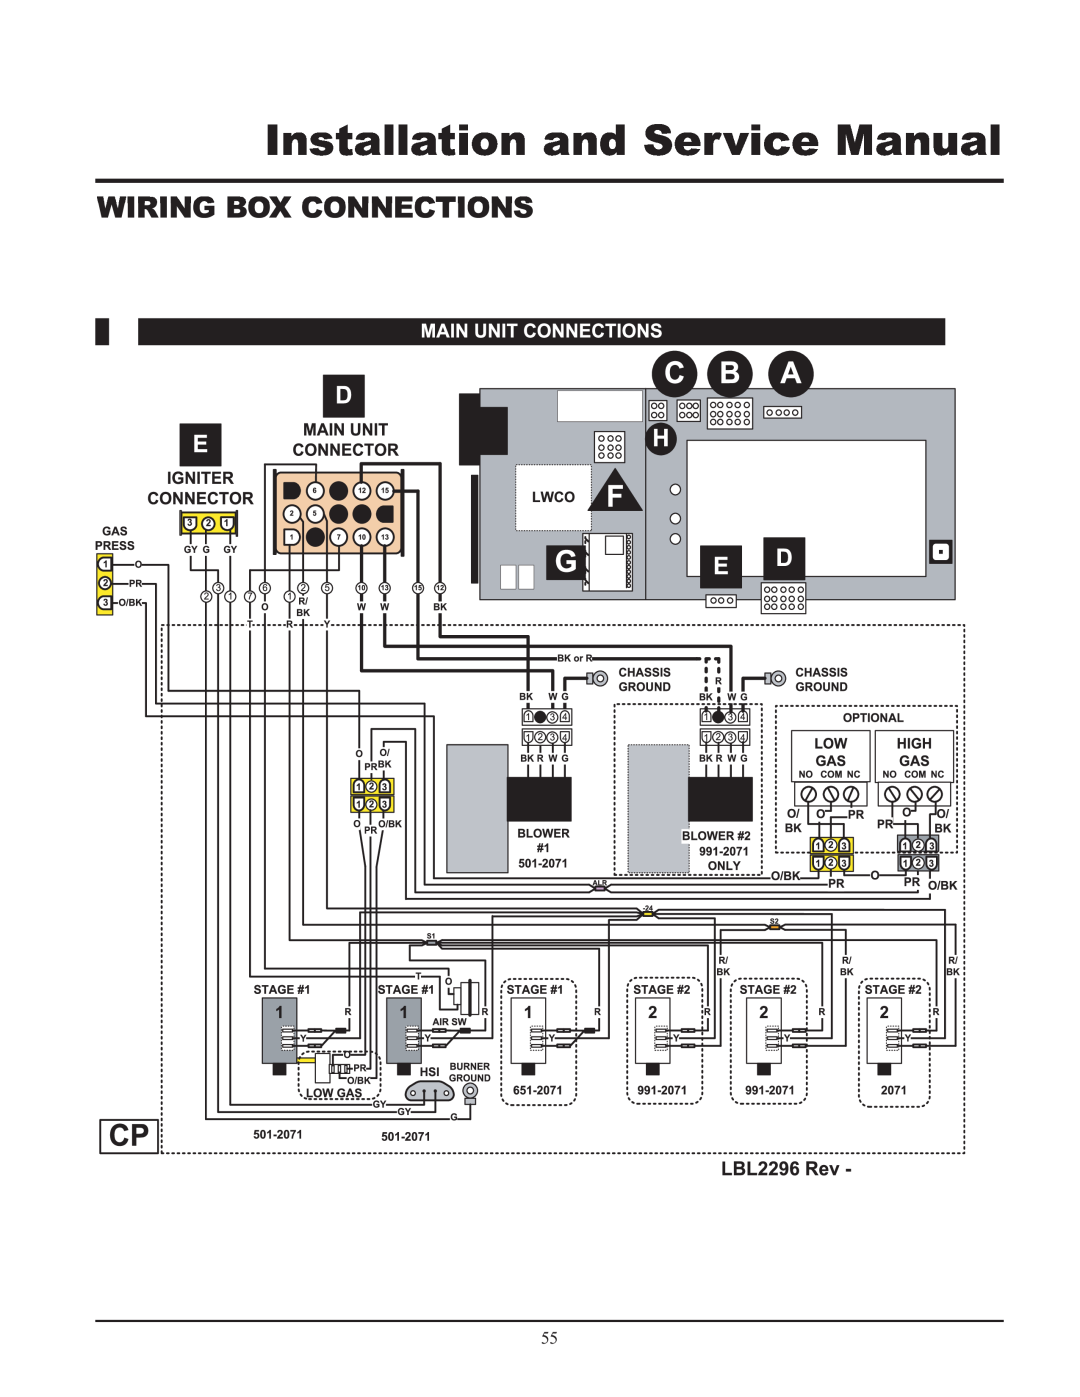 Lochinvar GAS HEATER FOR COMMERICAL POOL APPLICATIONS Installation and Service Manual, Wiring Box Connections 